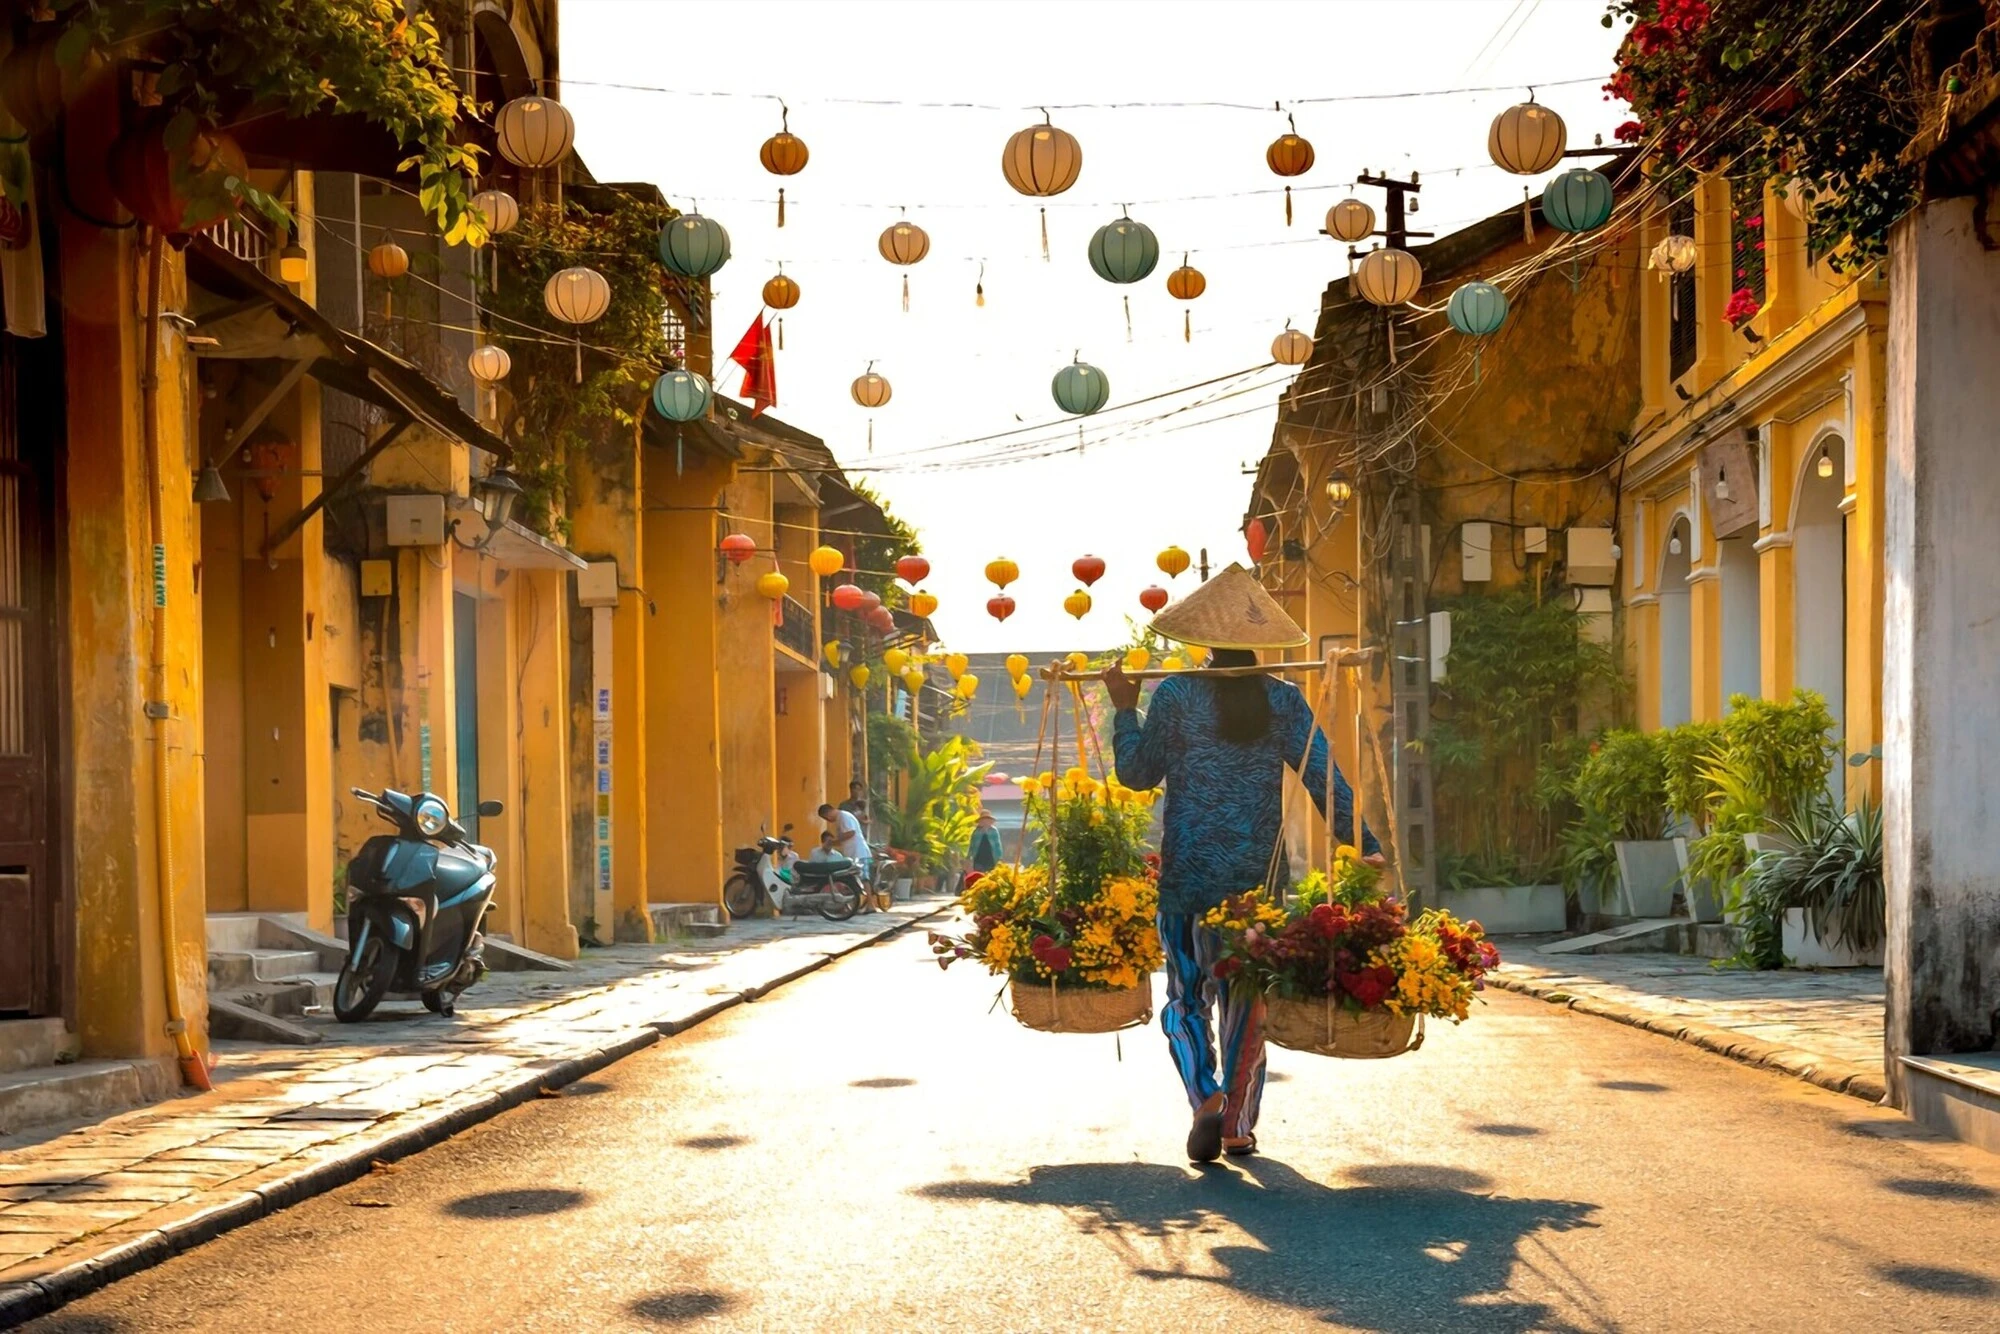 10 Awesome Things to Do in Hoi An, Vietnam for First-Timers - A travel guide for first-timers